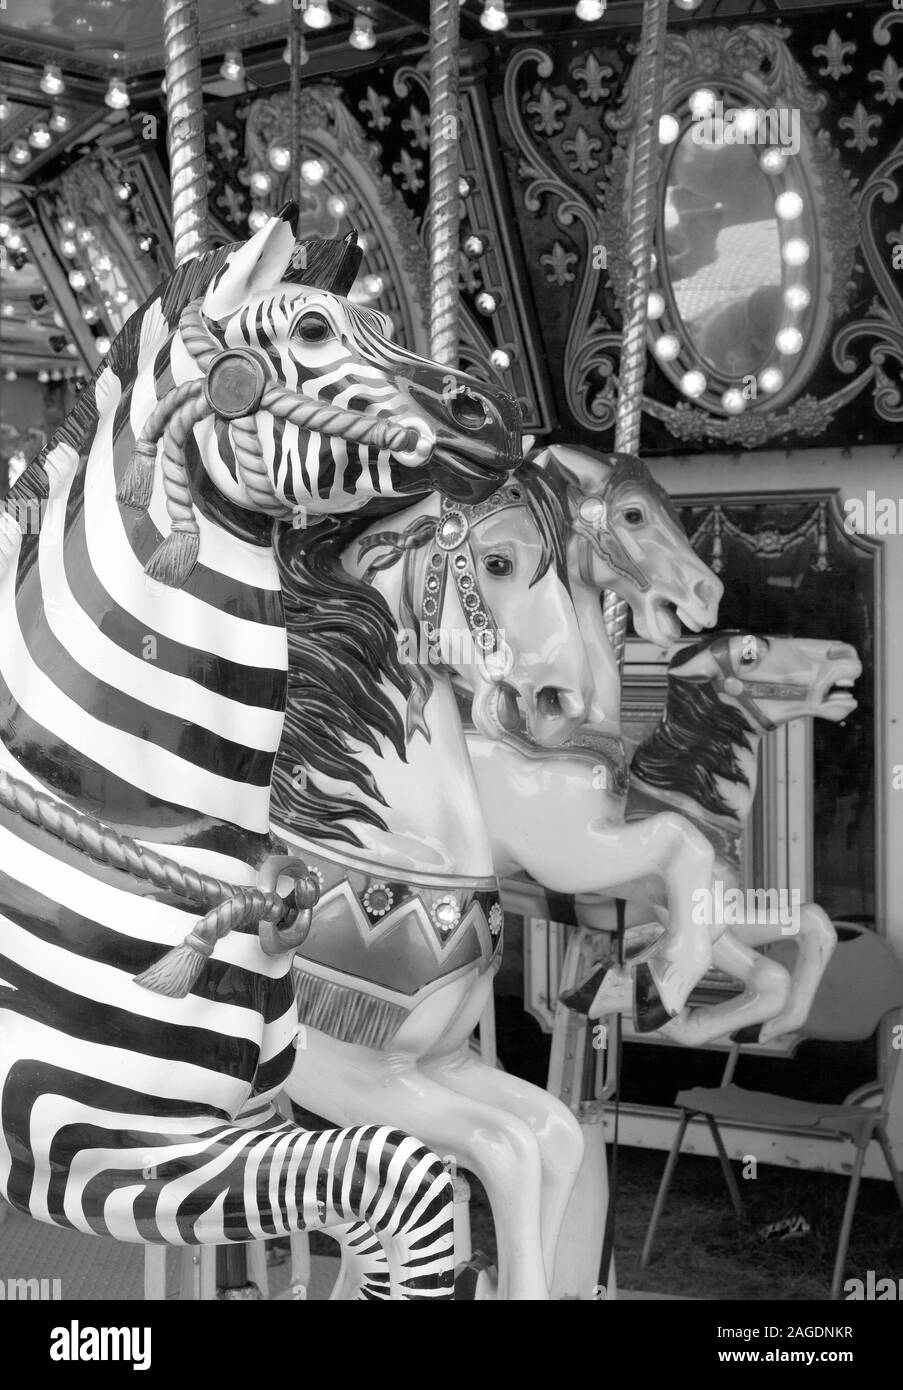 Carousel zebra and horses on a merry-go-round at the Fair,2015 Stock Photo